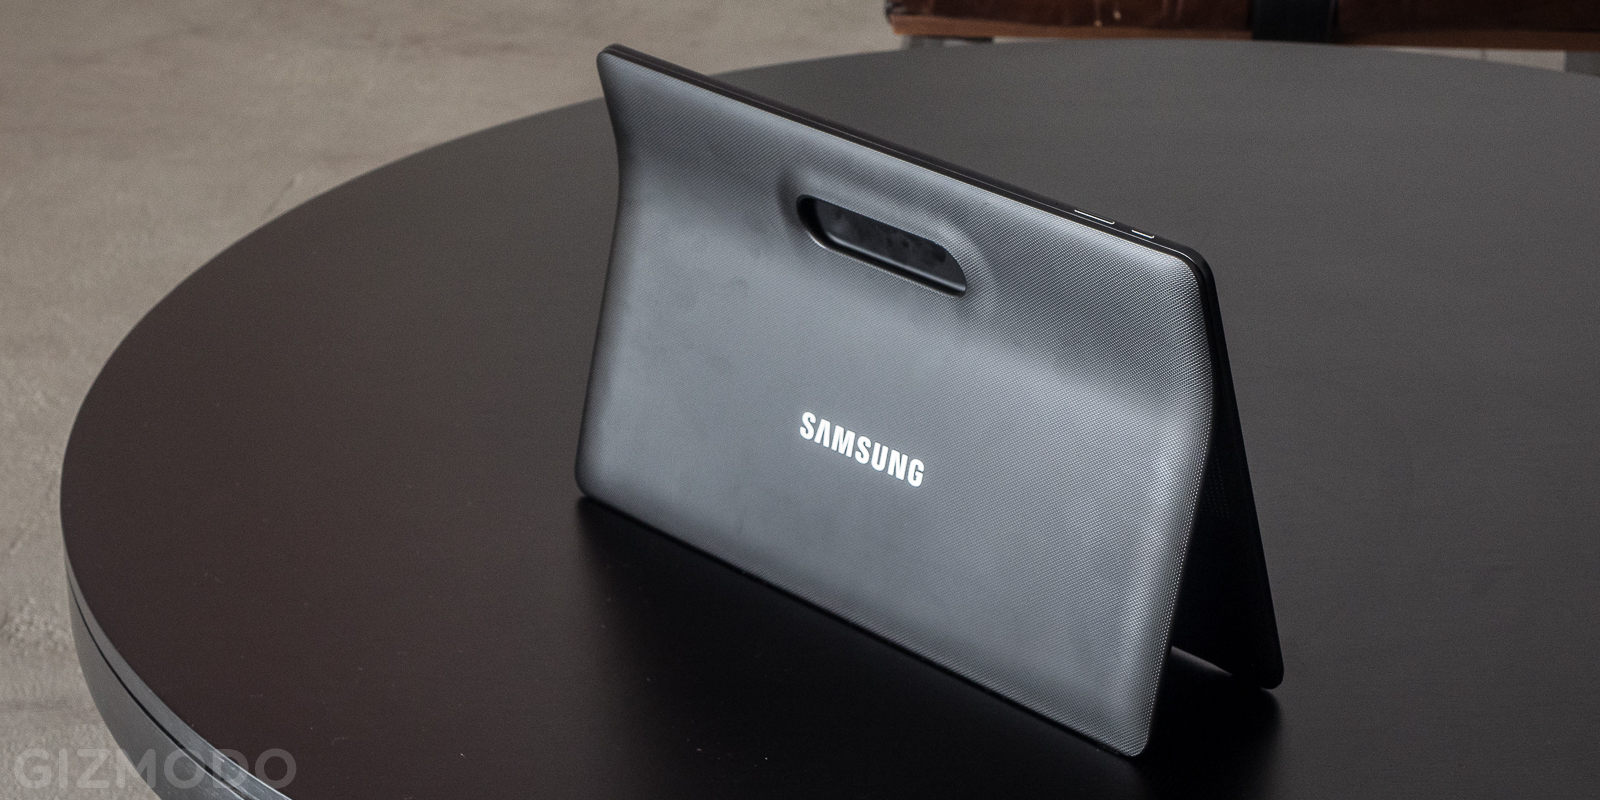 Samsung’s Galaxy View: Take-Anywhere TV You Never Knew You Wanted